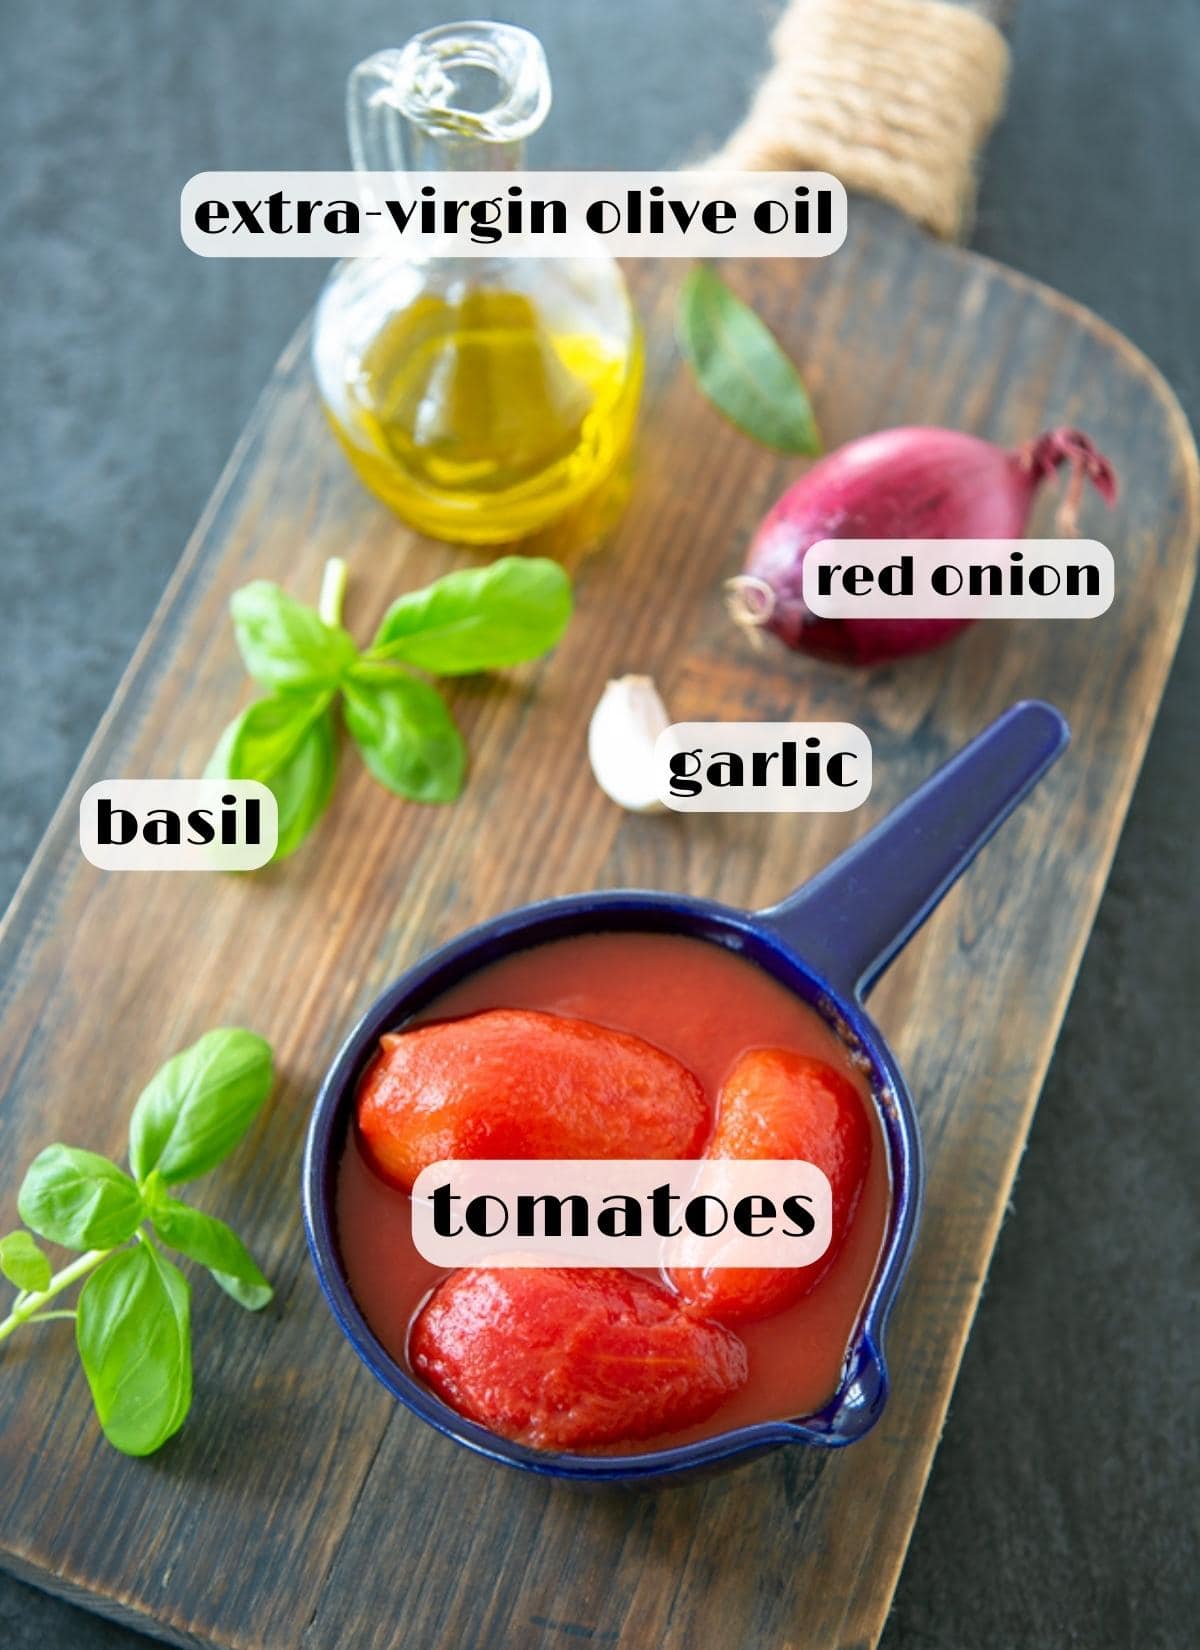 italian tomato sauce ingredients: red onion, canned whole tomatoes, garlic clove, basil leaves, olive oil.